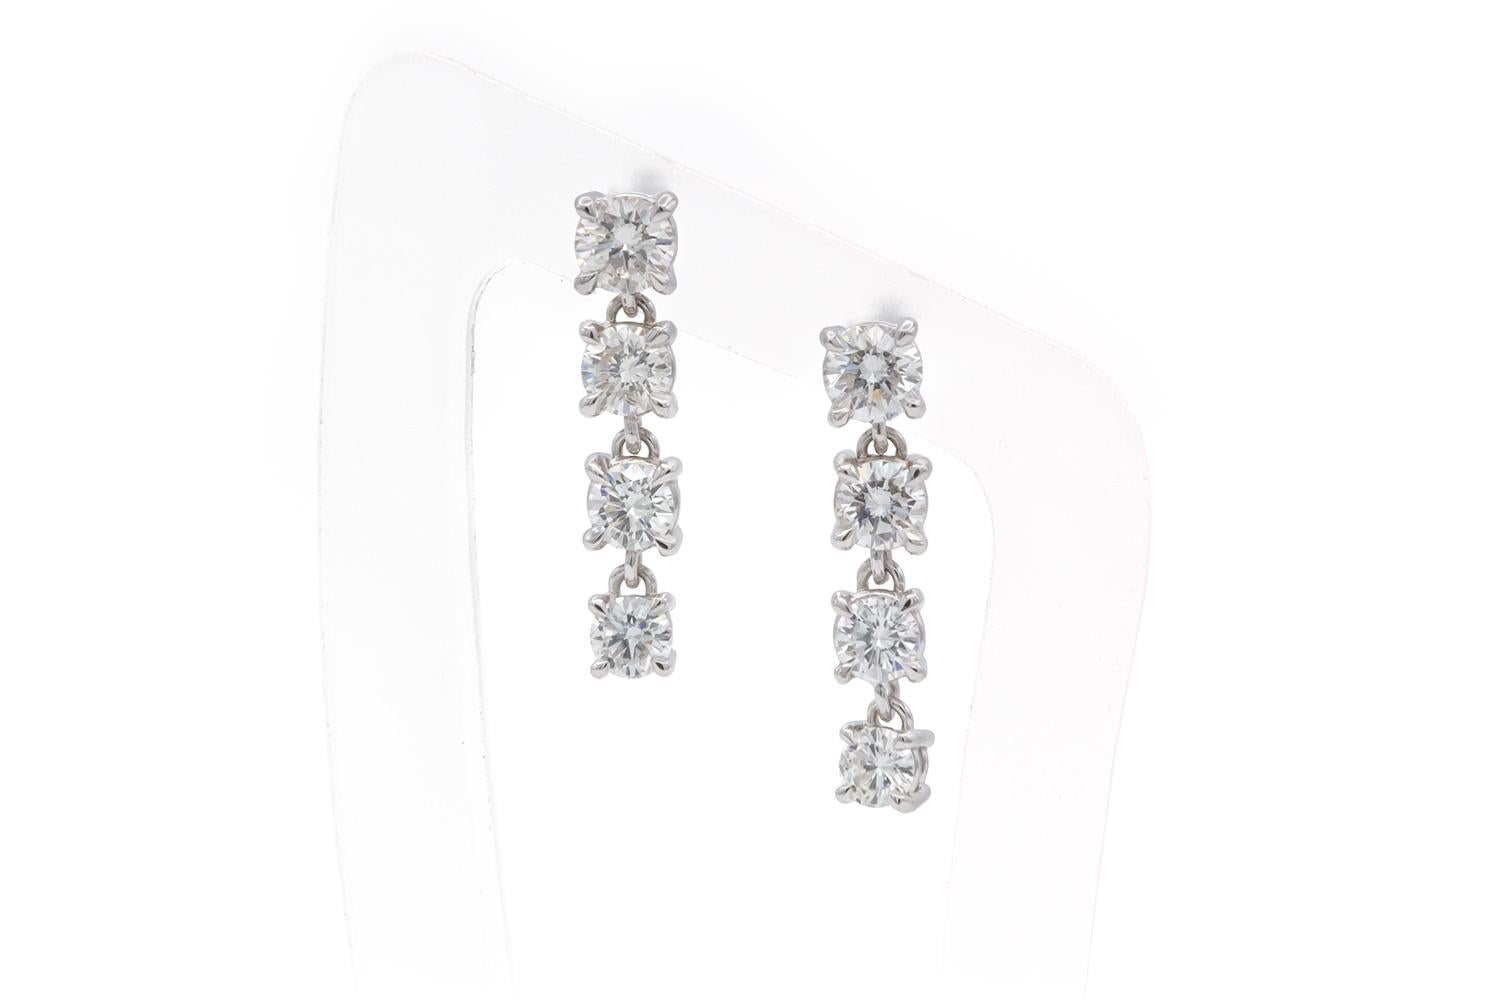 We are pleased to offer these Brand New Unworn 14k White Gold & Diamond Graduated Dangle Drop Earrings. These stunning earrings are fun and vibrant! They feature 0.98ctw G-H/SI1-SI2 round brilliant cut diamonds set in 14k white gold 4 prong dangle